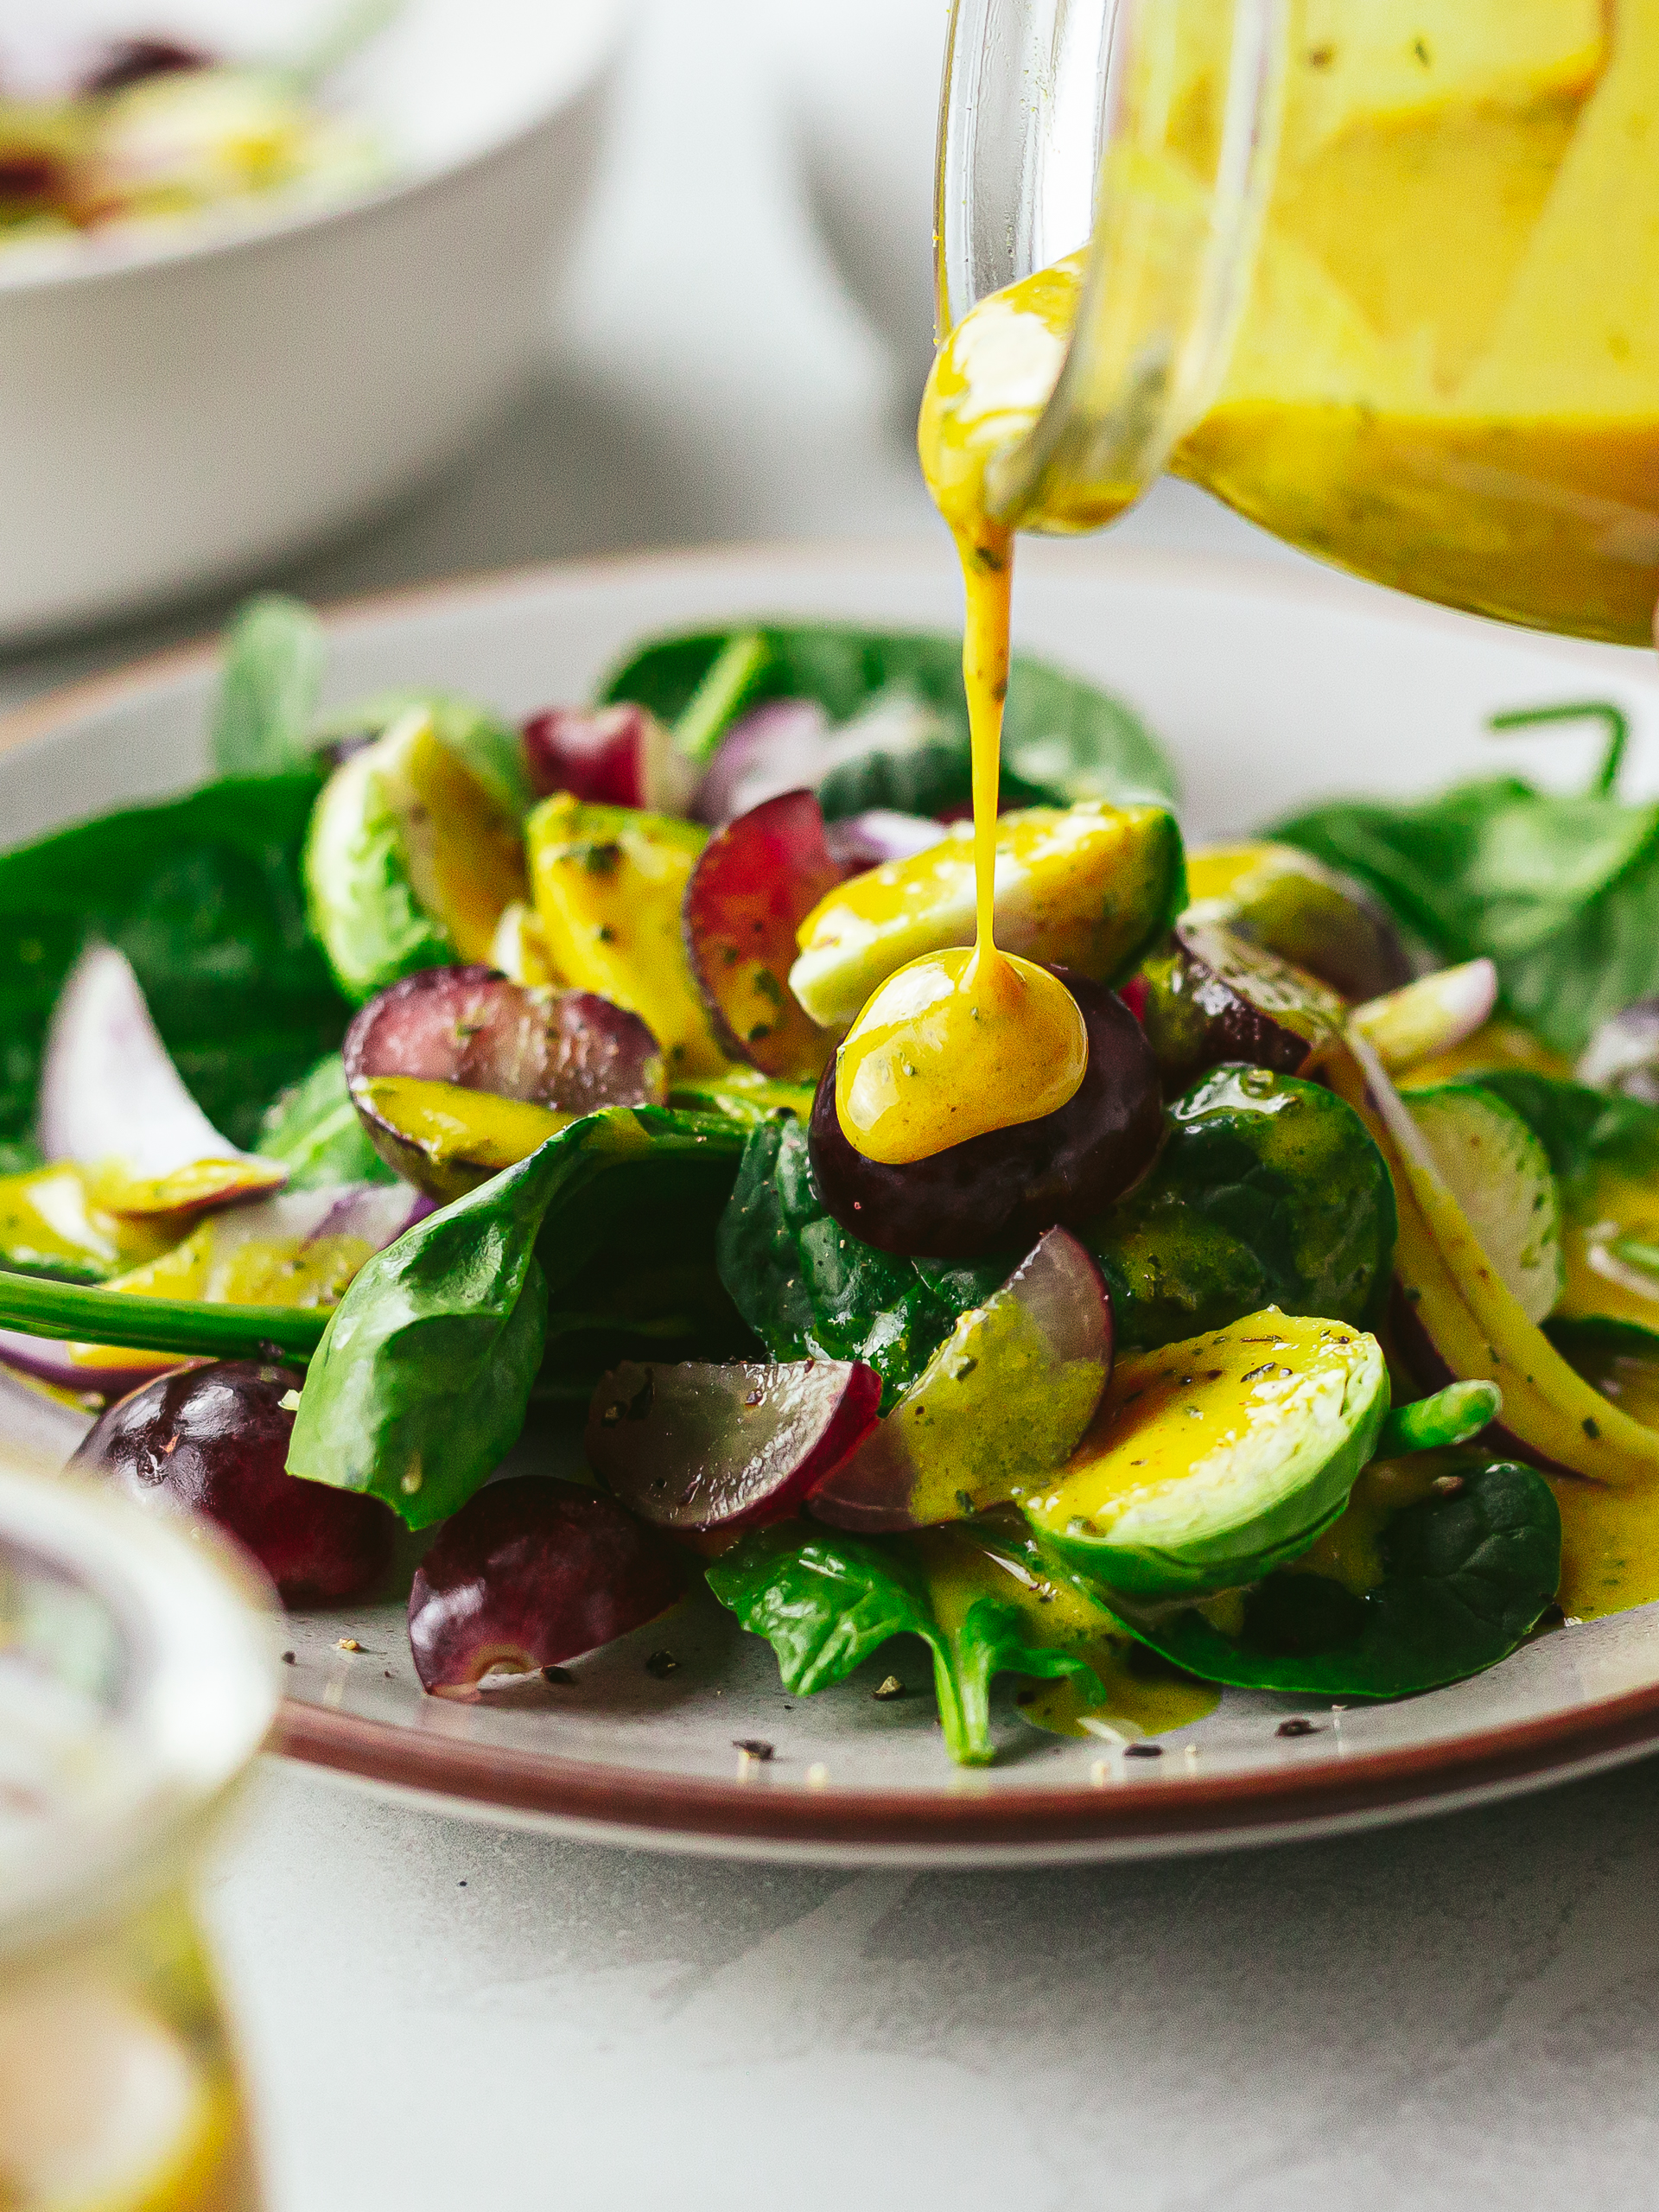 anti-inflammatory ginger turmeric dressing poured over a healthy salad